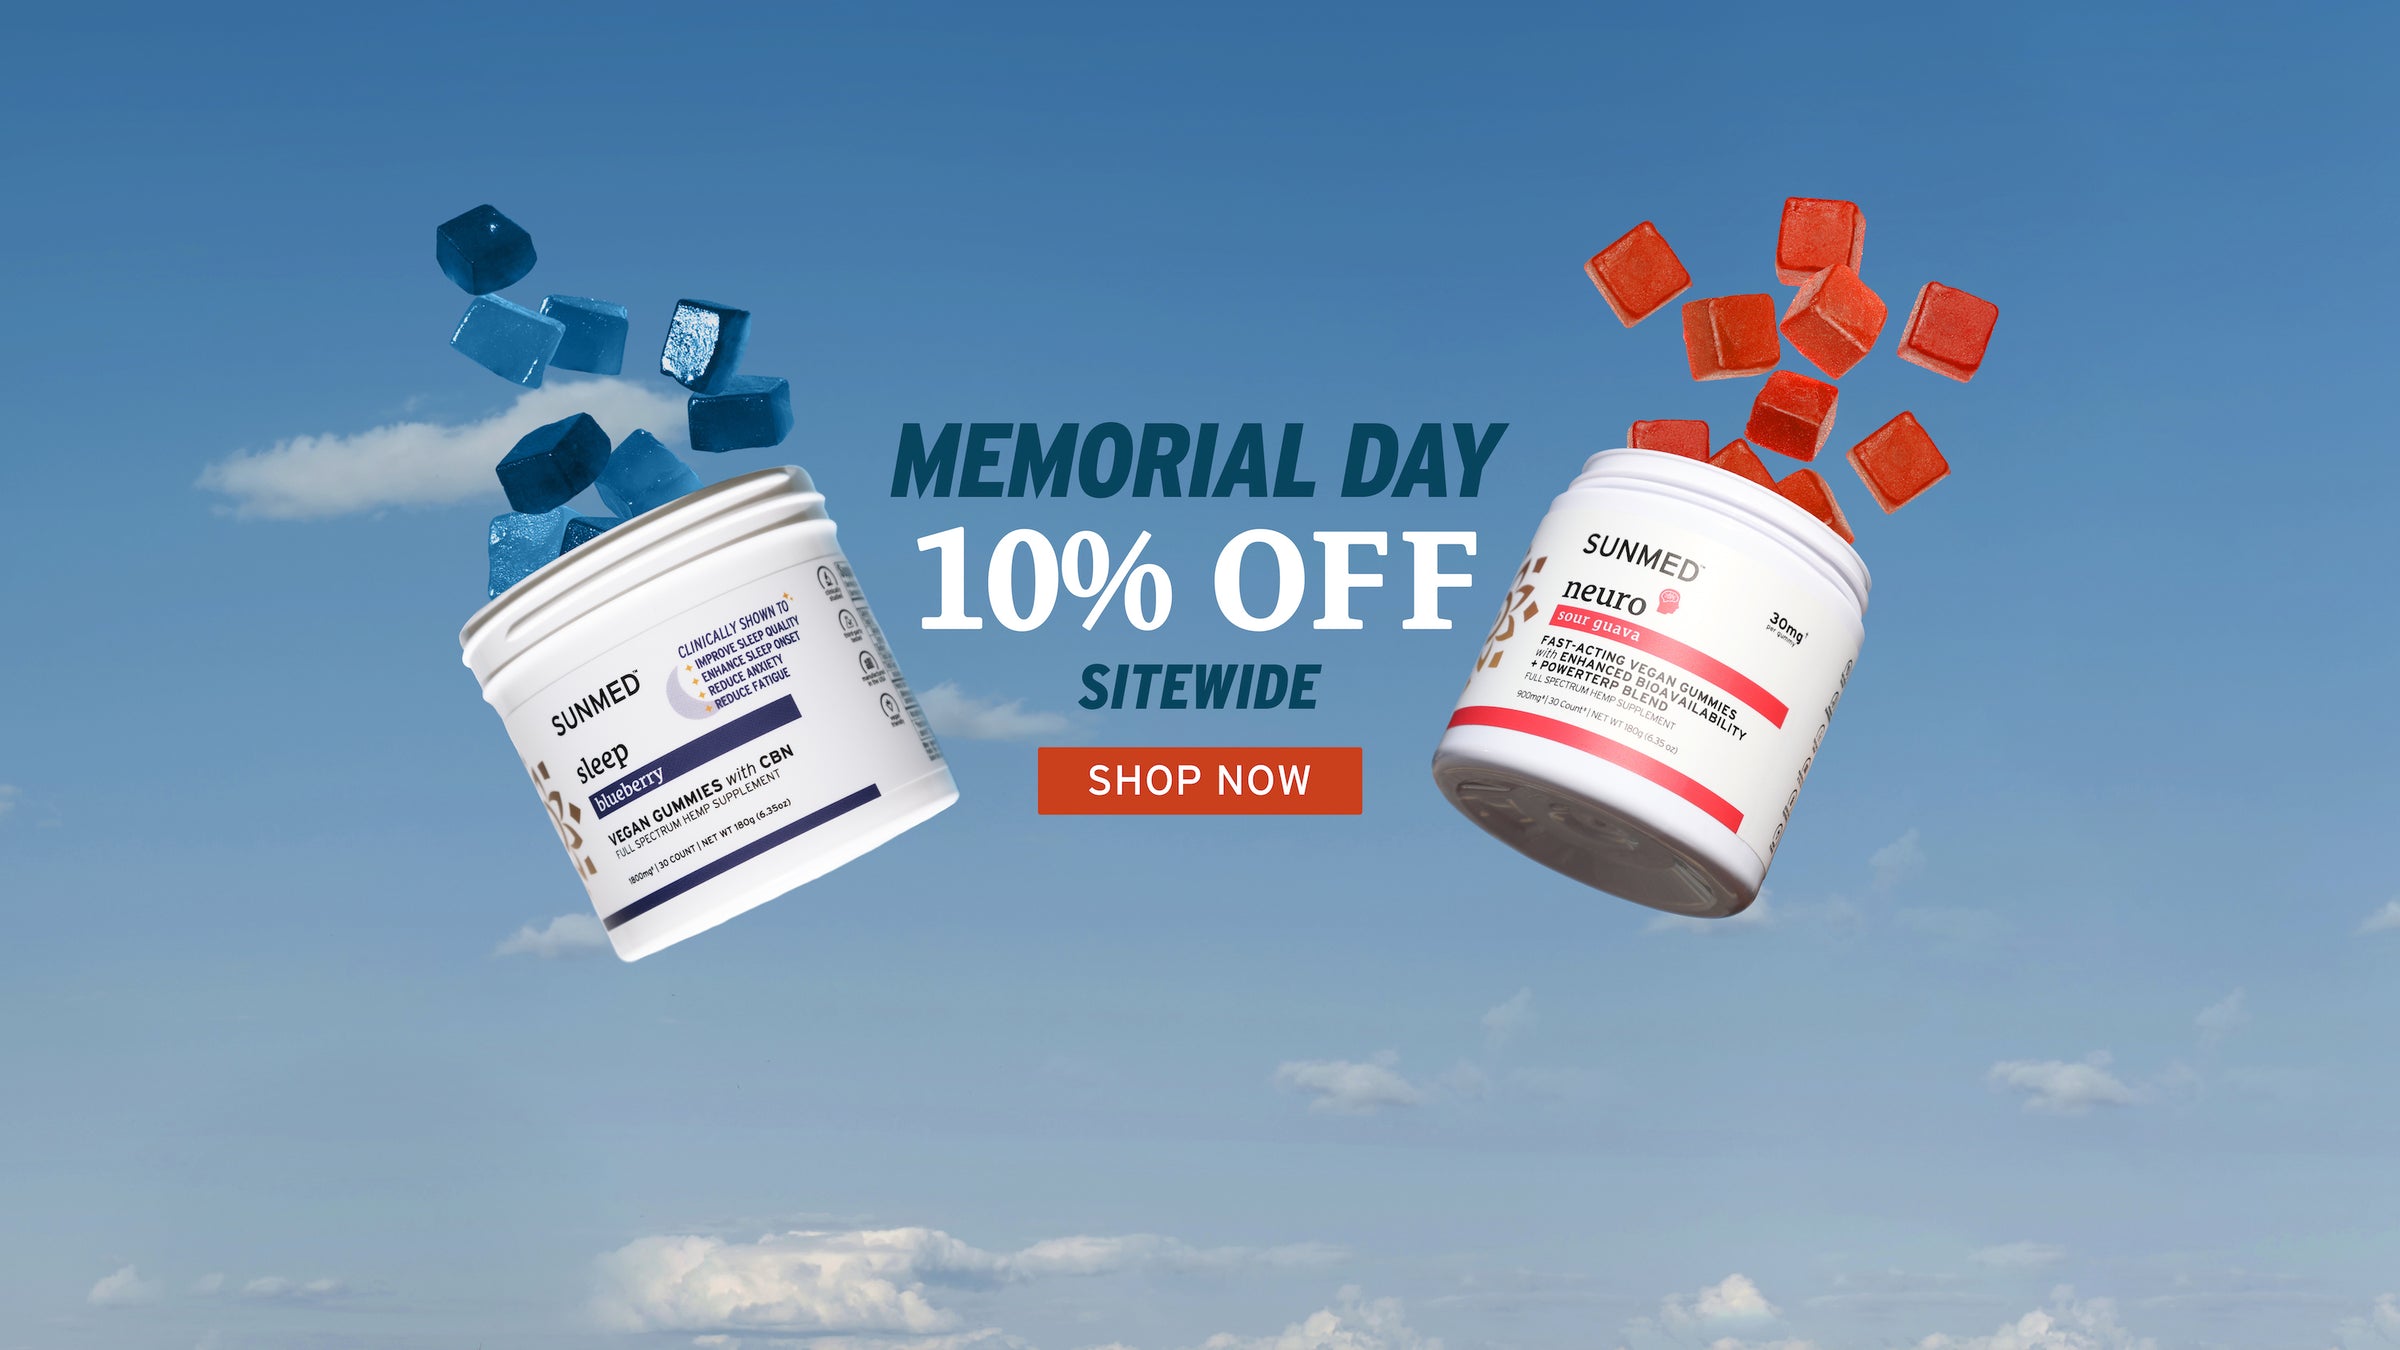 gift relief to the mom in your life. up to 25% off. code MD15 for 15% OFF $100 or more. code MD20 for 20% OFF $150 or more. code MD25 for 25% OFF $200 or more.